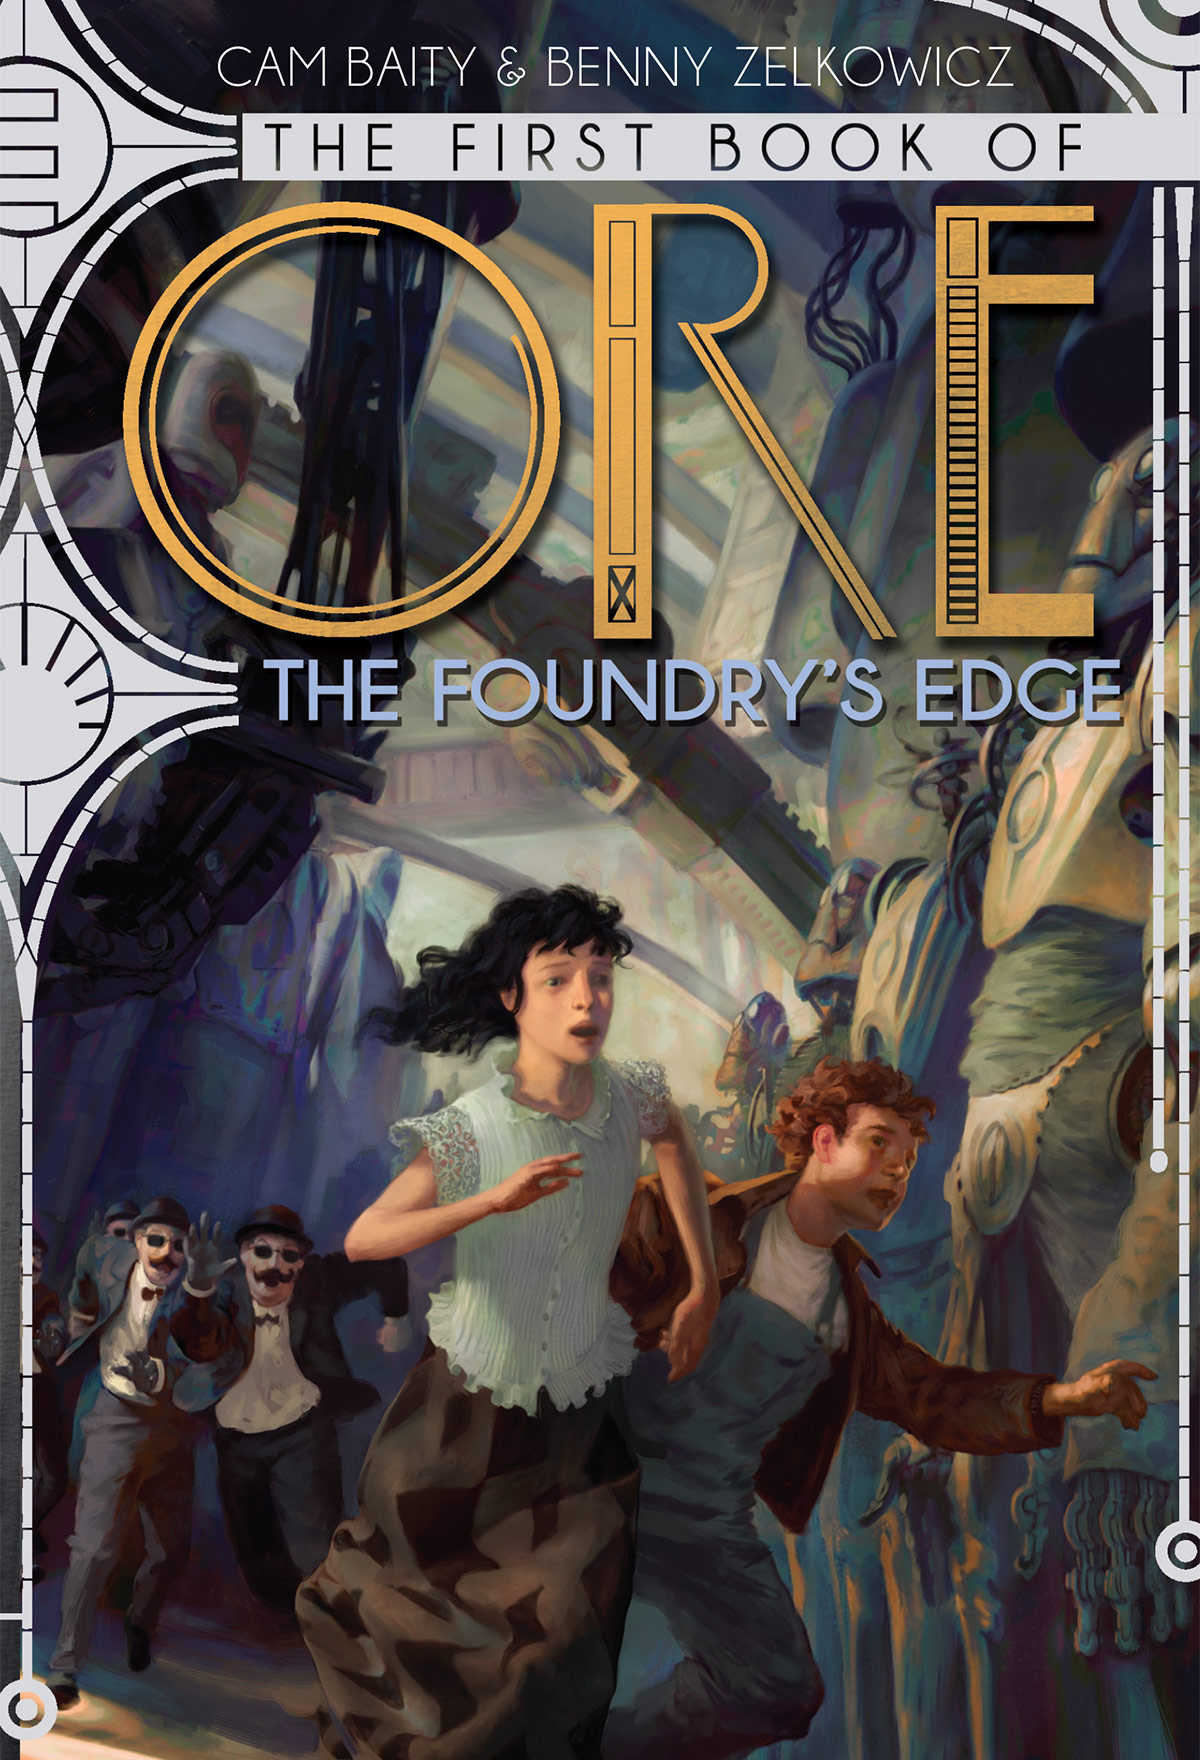 The First Book of Ore the Foundry's Edge